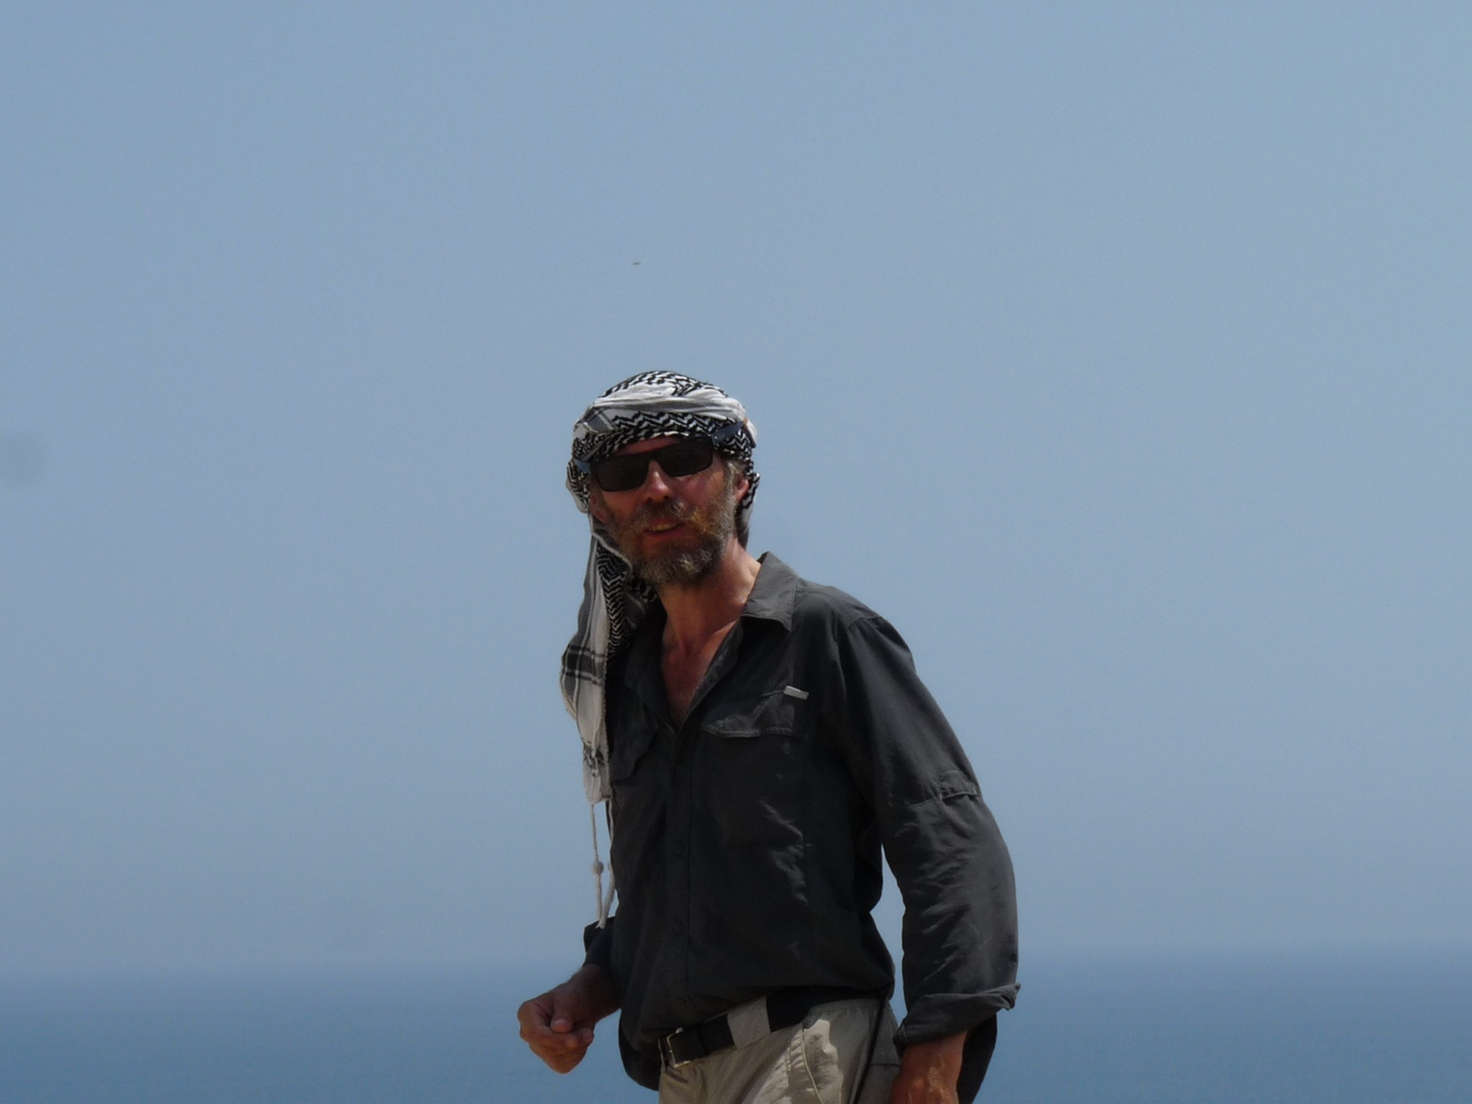 Thierry Petit wears a long grey loose-fitting button up shirt, light grey pants, and a black belt. He has a headscarf on, black sunglasses, and has grey and black facial hair. The background is light blue, and he is presumably somewhere arid.